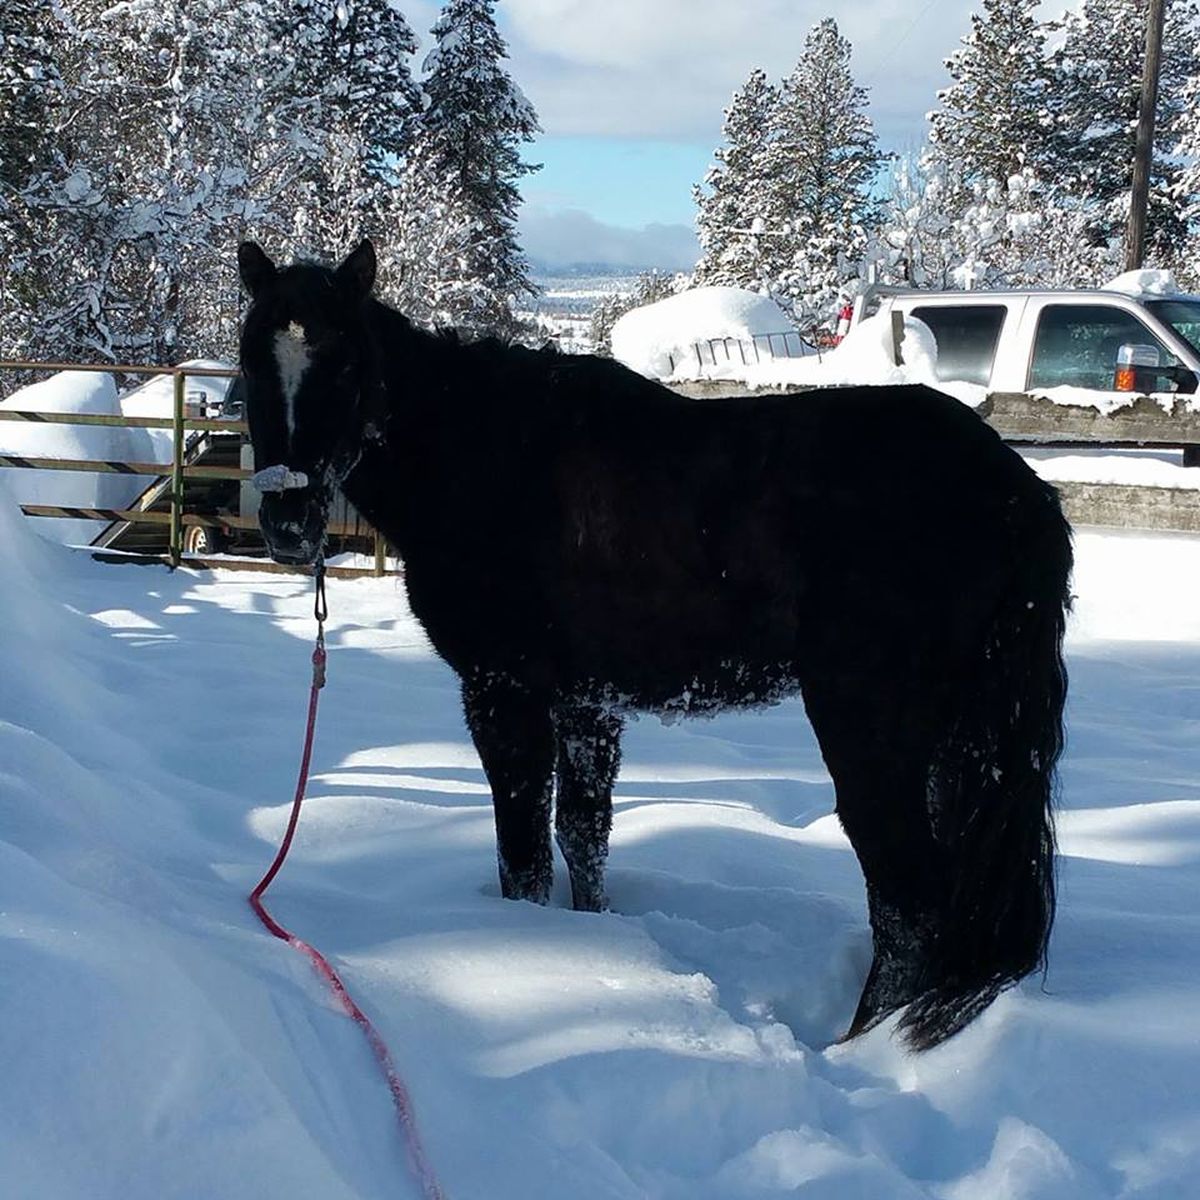 One of two horses stranded for days in high mountain snowfields of near McCall, Idaho, was rescued on Jan. 24, 2017, by helicopter. It was recovering fine, sources from Idaho Horse Rescue say.  (Heidi Morell)